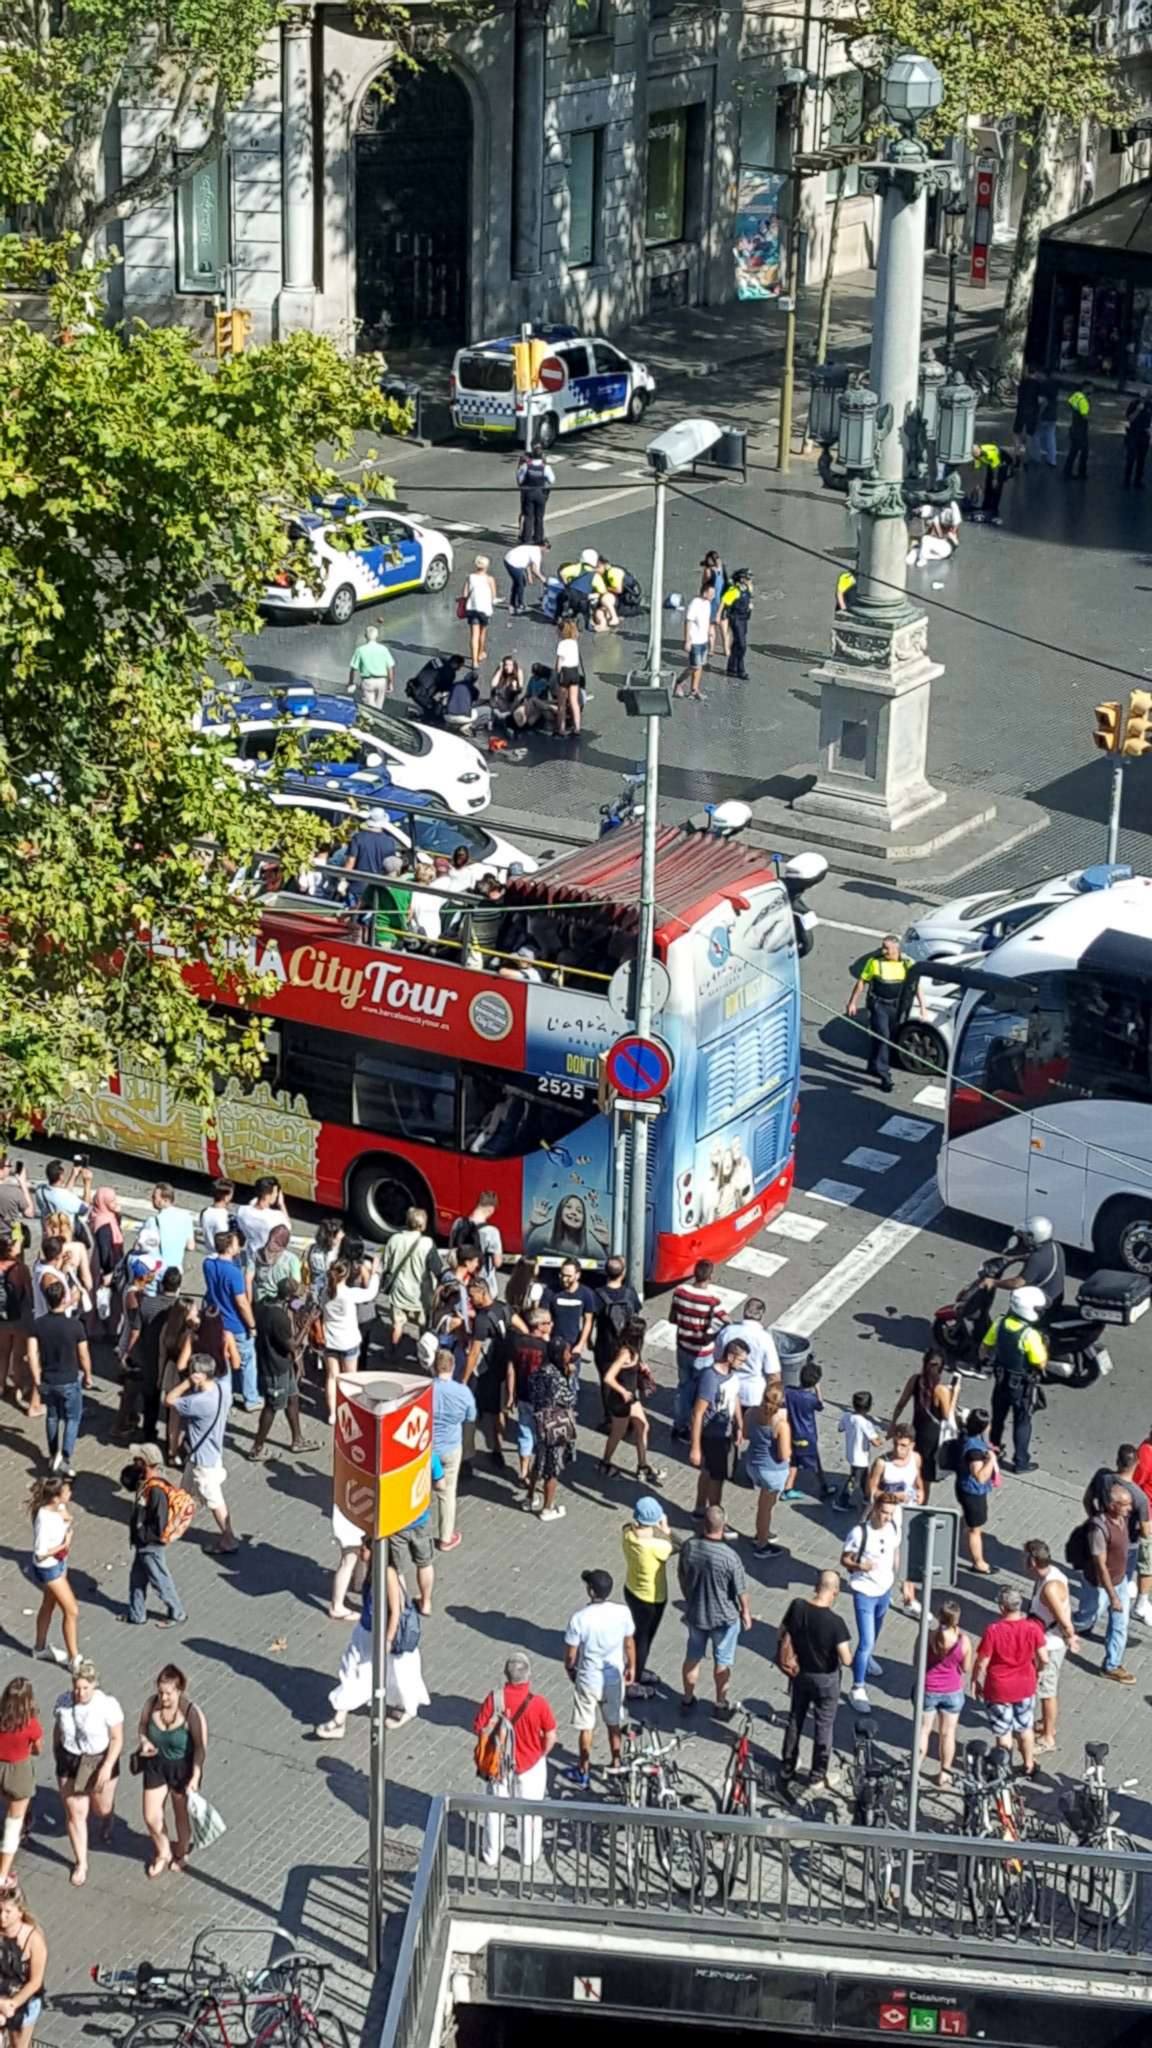 PHOTO: Spanish authorities confirm people are injured after a truck reportedly hit people on a busy Barcelona street, Aug. 17. 2017.